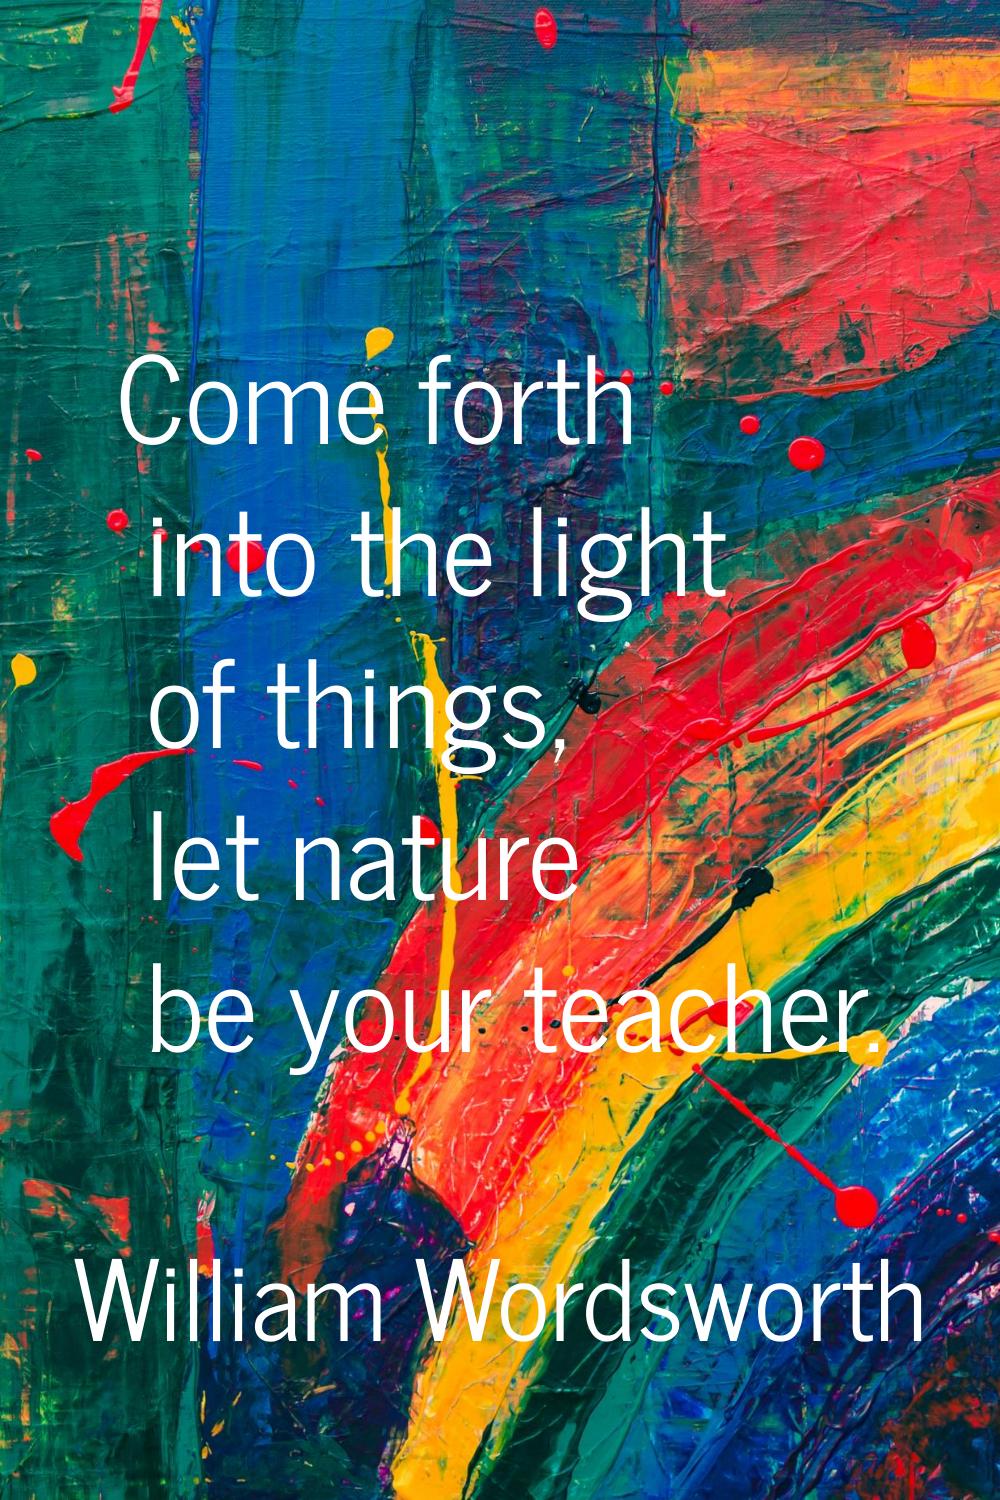 Come forth into the light of things, let nature be your teacher.